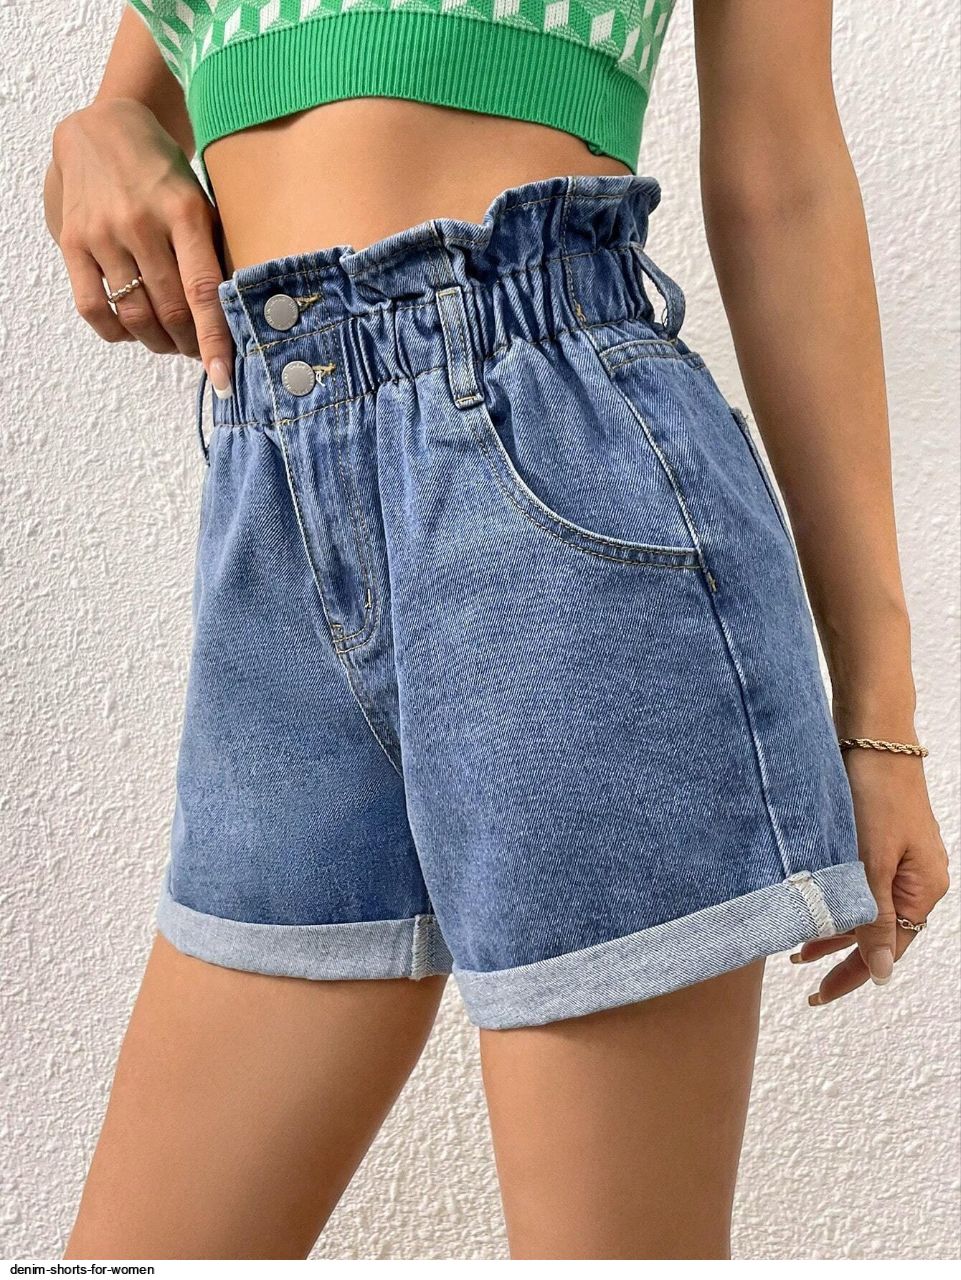 Z1975 RIPPED DENIM SHORTS | Ripped jeans designs, Ripped denim shorts,  Ripped denim